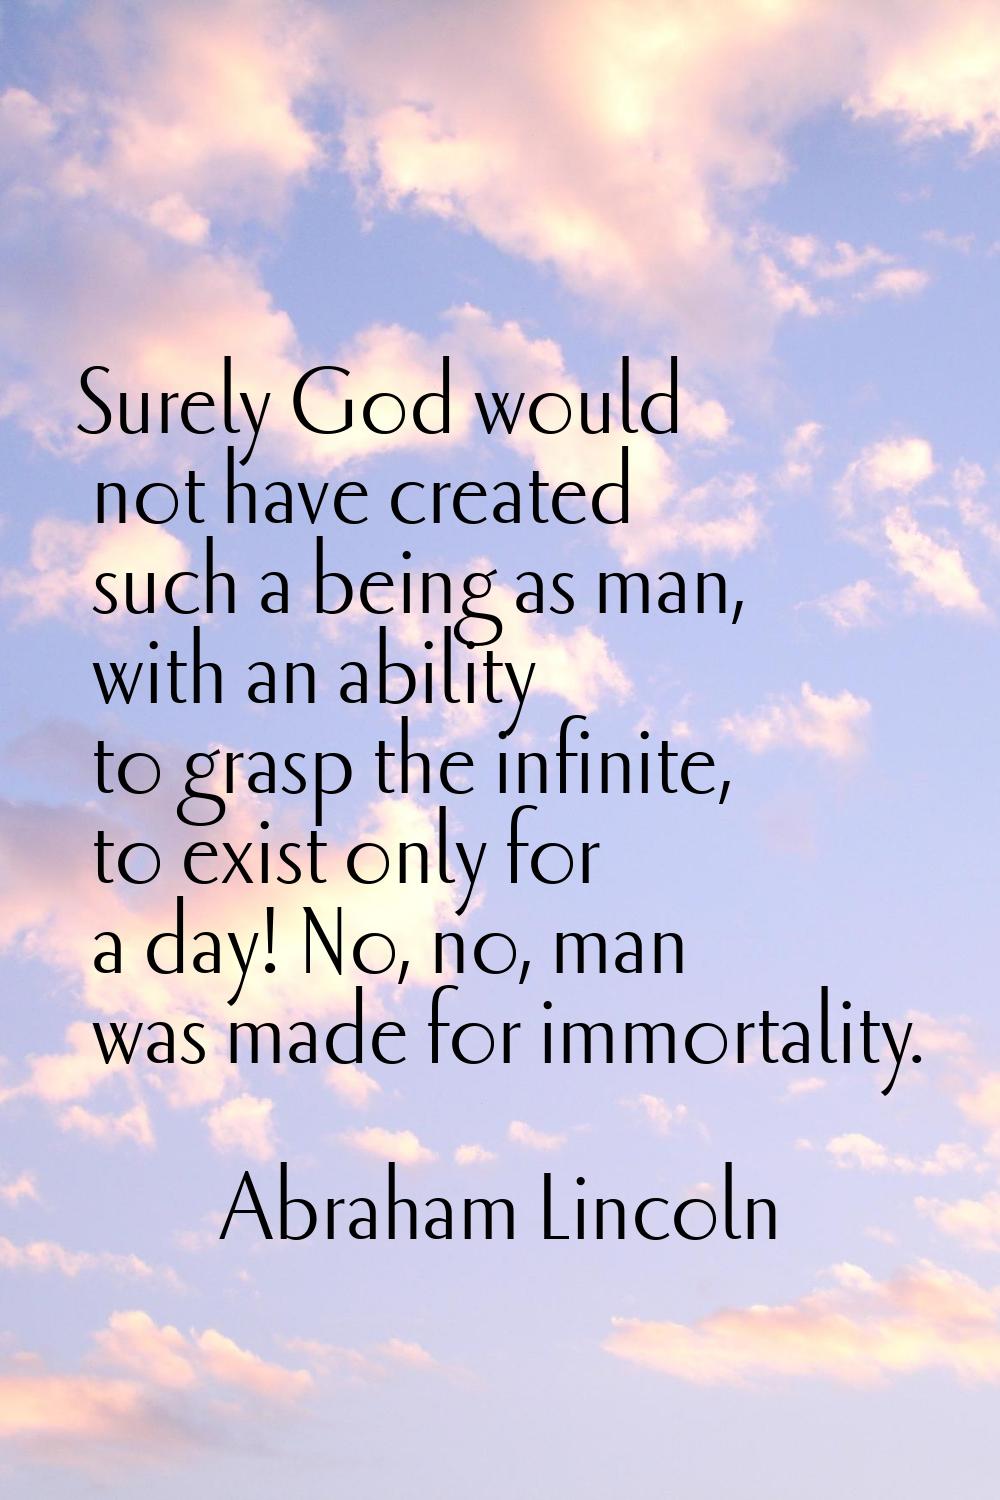 Surely God would not have created such a being as man, with an ability to grasp the infinite, to ex